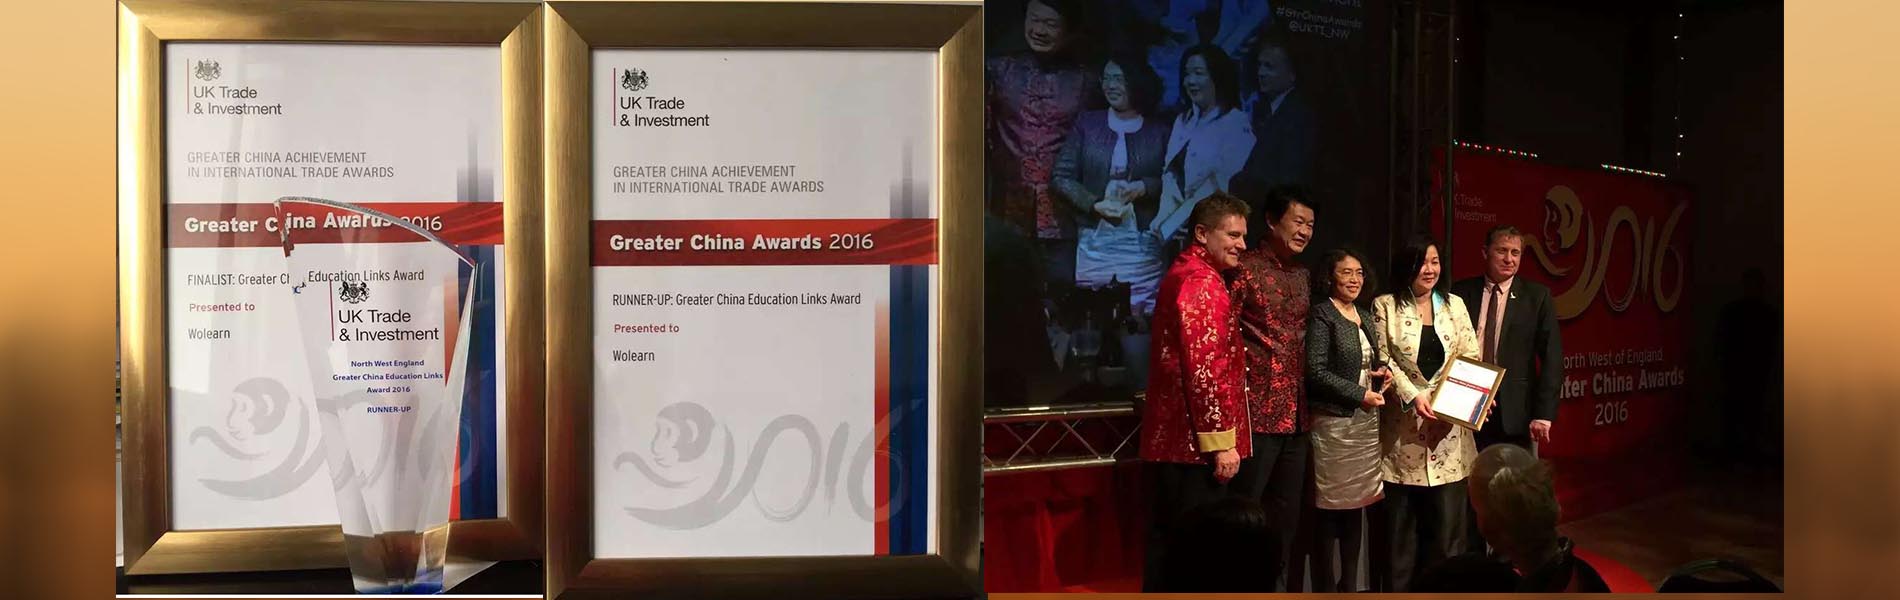 Wolearn wins Runner up: Greater China Education Links Award 2016